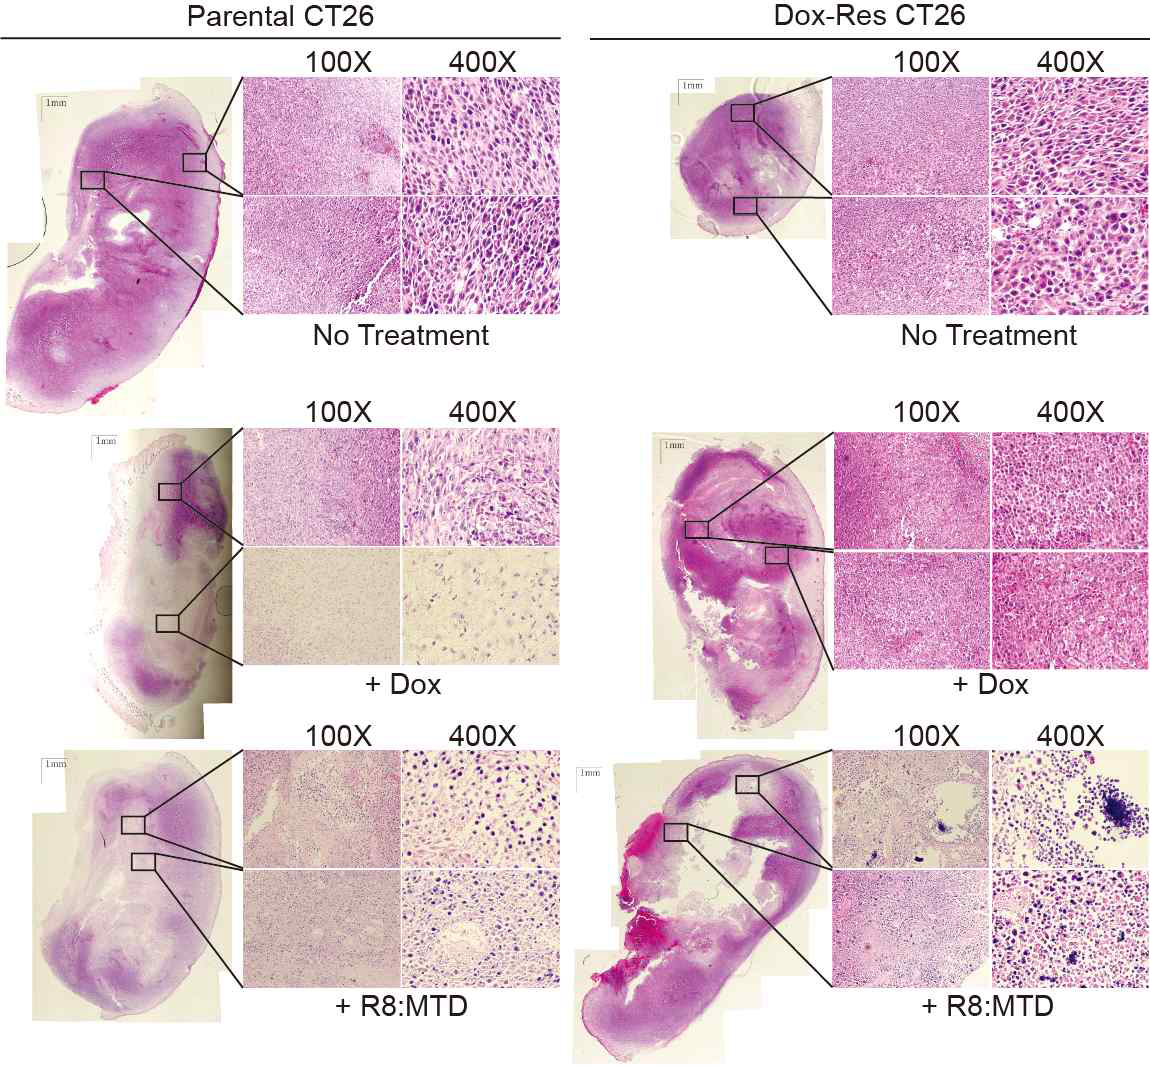 Intratumorla injection of Doxorubicin and R8:MTD Tumors were established in 6 week-old BALB/c mice by injecting 2.5 × 105 parental or Dox-Res CT26 cells into subcutaneous layer of mice backs. Then, 100μl each of R8:MTD(100 μM), Doxorubicin (20 μM), and saline were separately injected directly into tumor tissues once daily for 3 consecutive days. Then, 24 hours after final R8:MTD, Doxorubicin, and saline injections, tumor tissues were processed for hematoxylin and eosin staining after 4% formaldehyde fixation and paraffin embedding Images of whole tumor tissues (magnification 40x) were taken using a light microscope and phto-merged using Adobe Photoshop CSA5